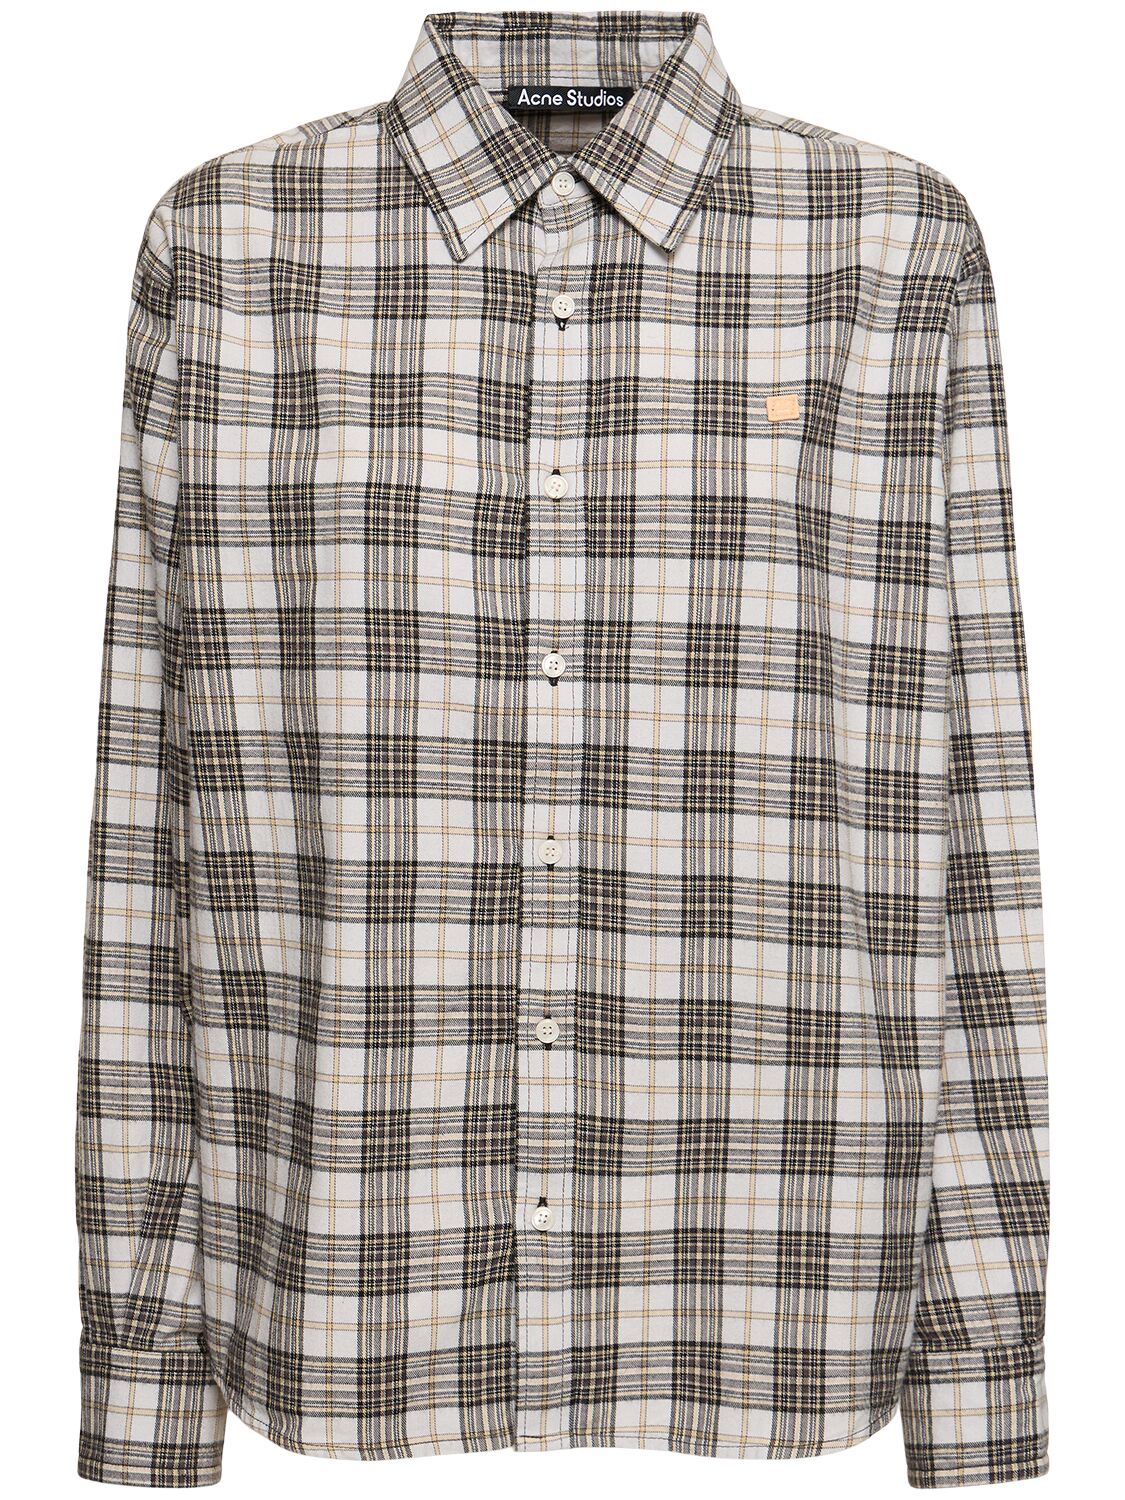 Acne Studios Cotton Twill Checked Long Sleeve Shirt In 멀티컬러